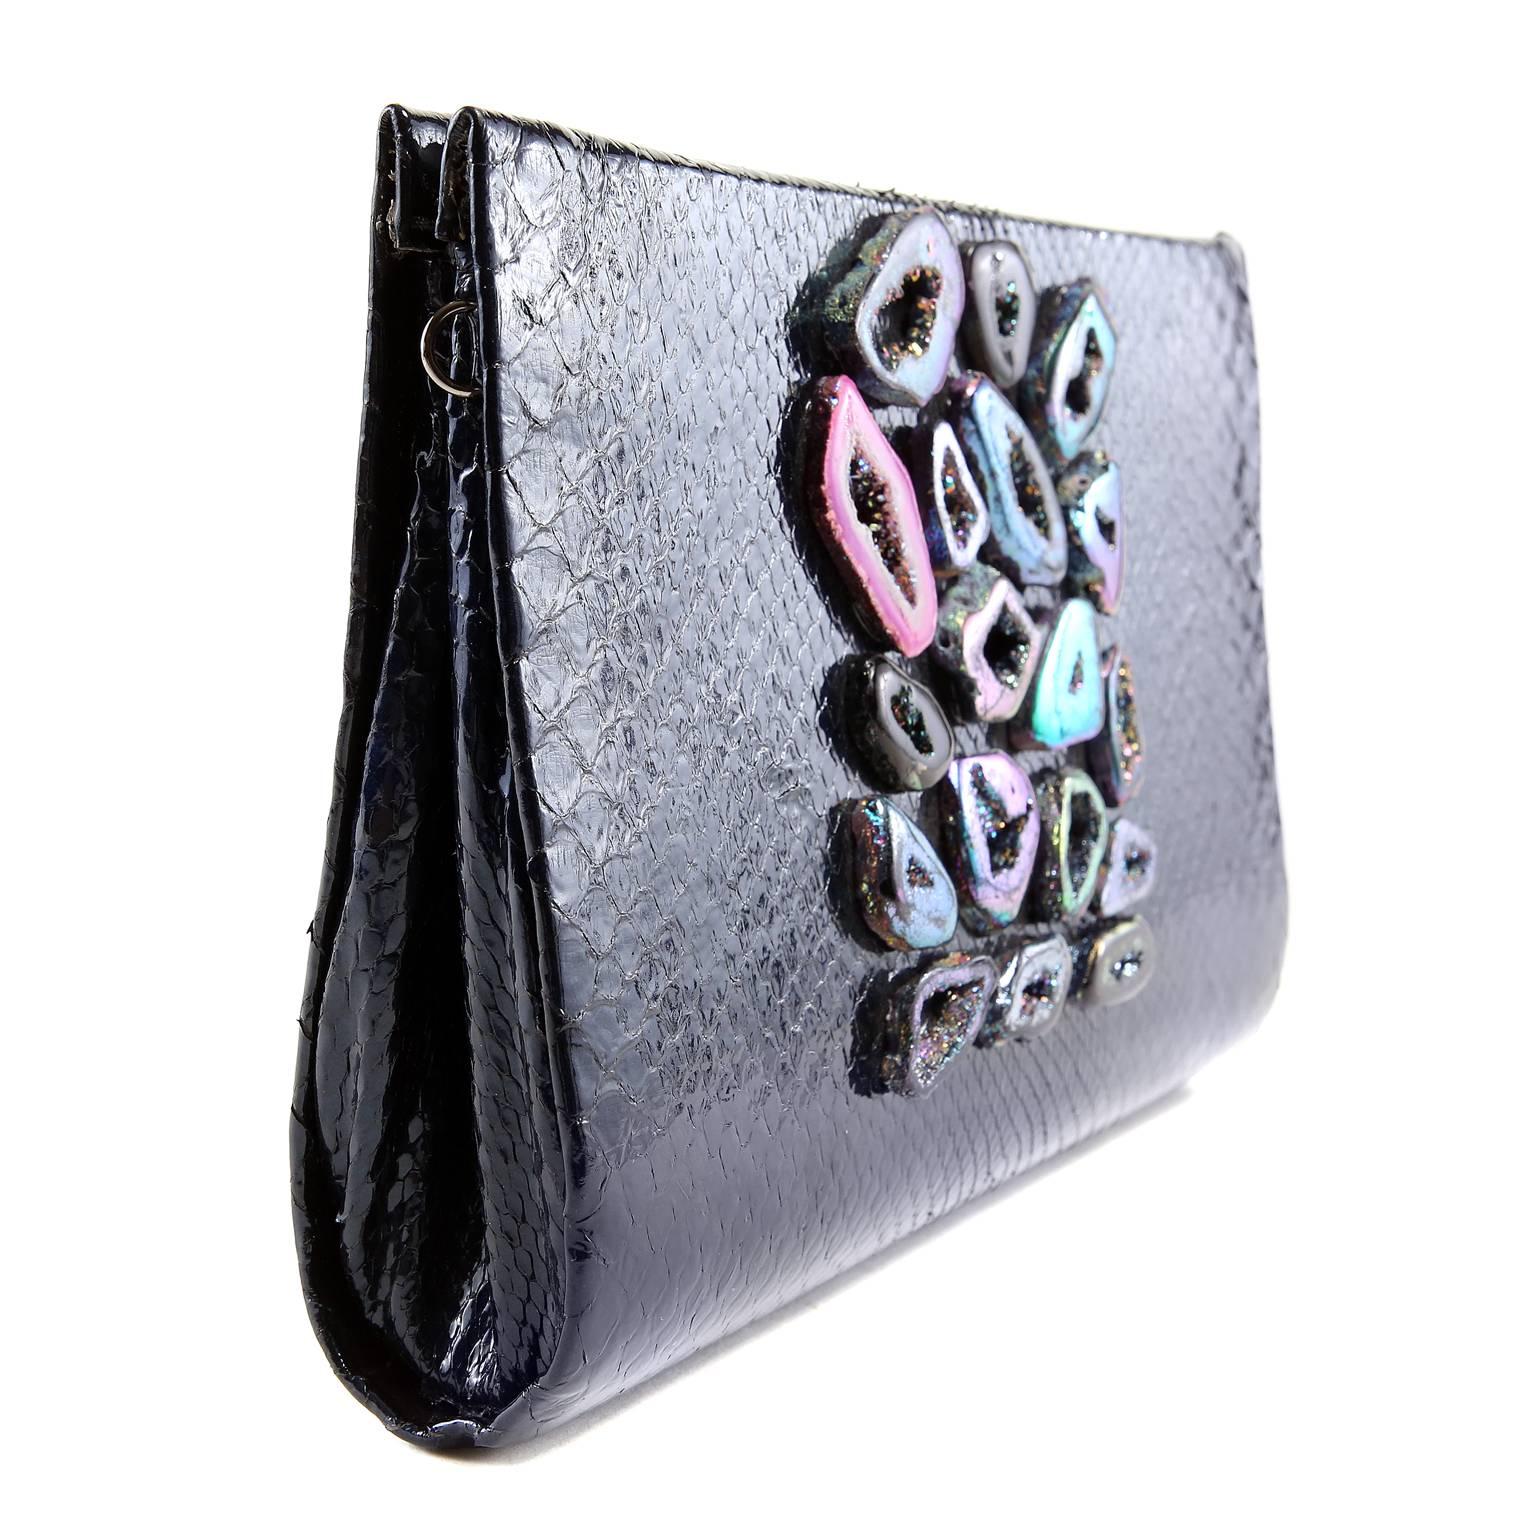 Paige Gamble Black Python Clutch In New Condition For Sale In Malibu, CA